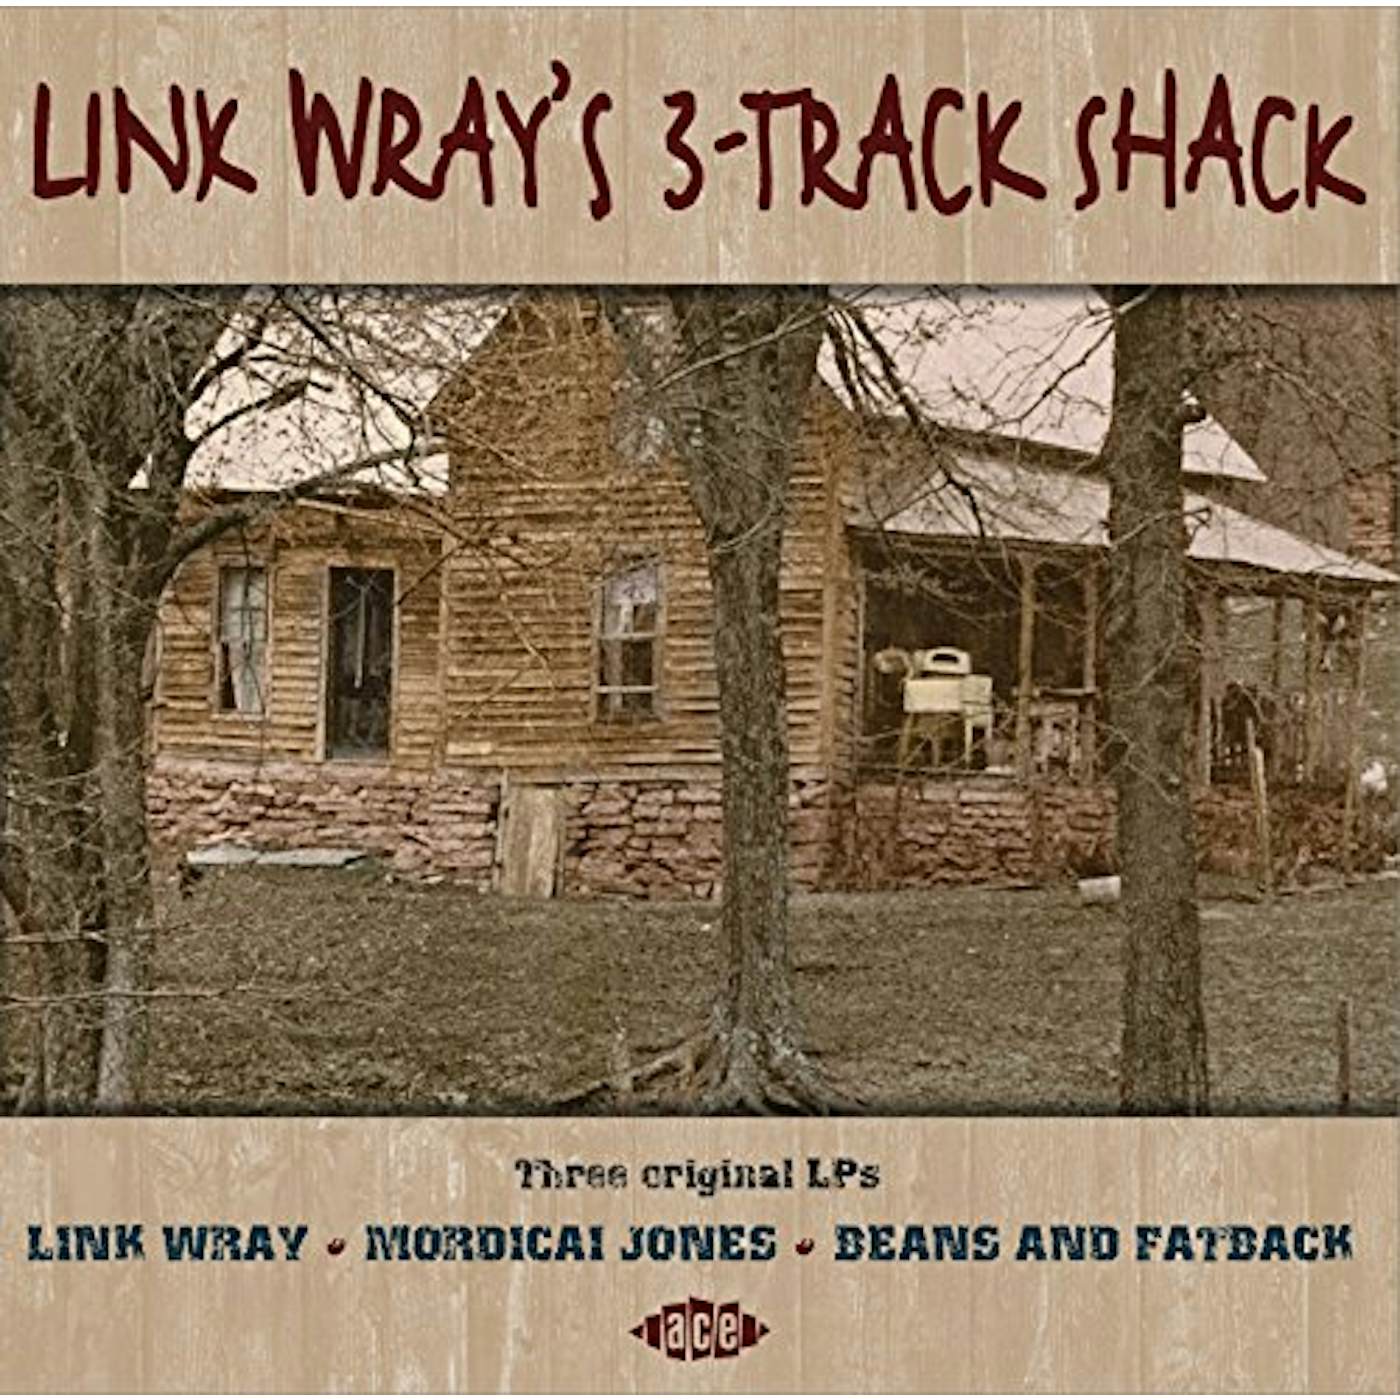 LINK WRAY'S 3-TRACK SHACK CD